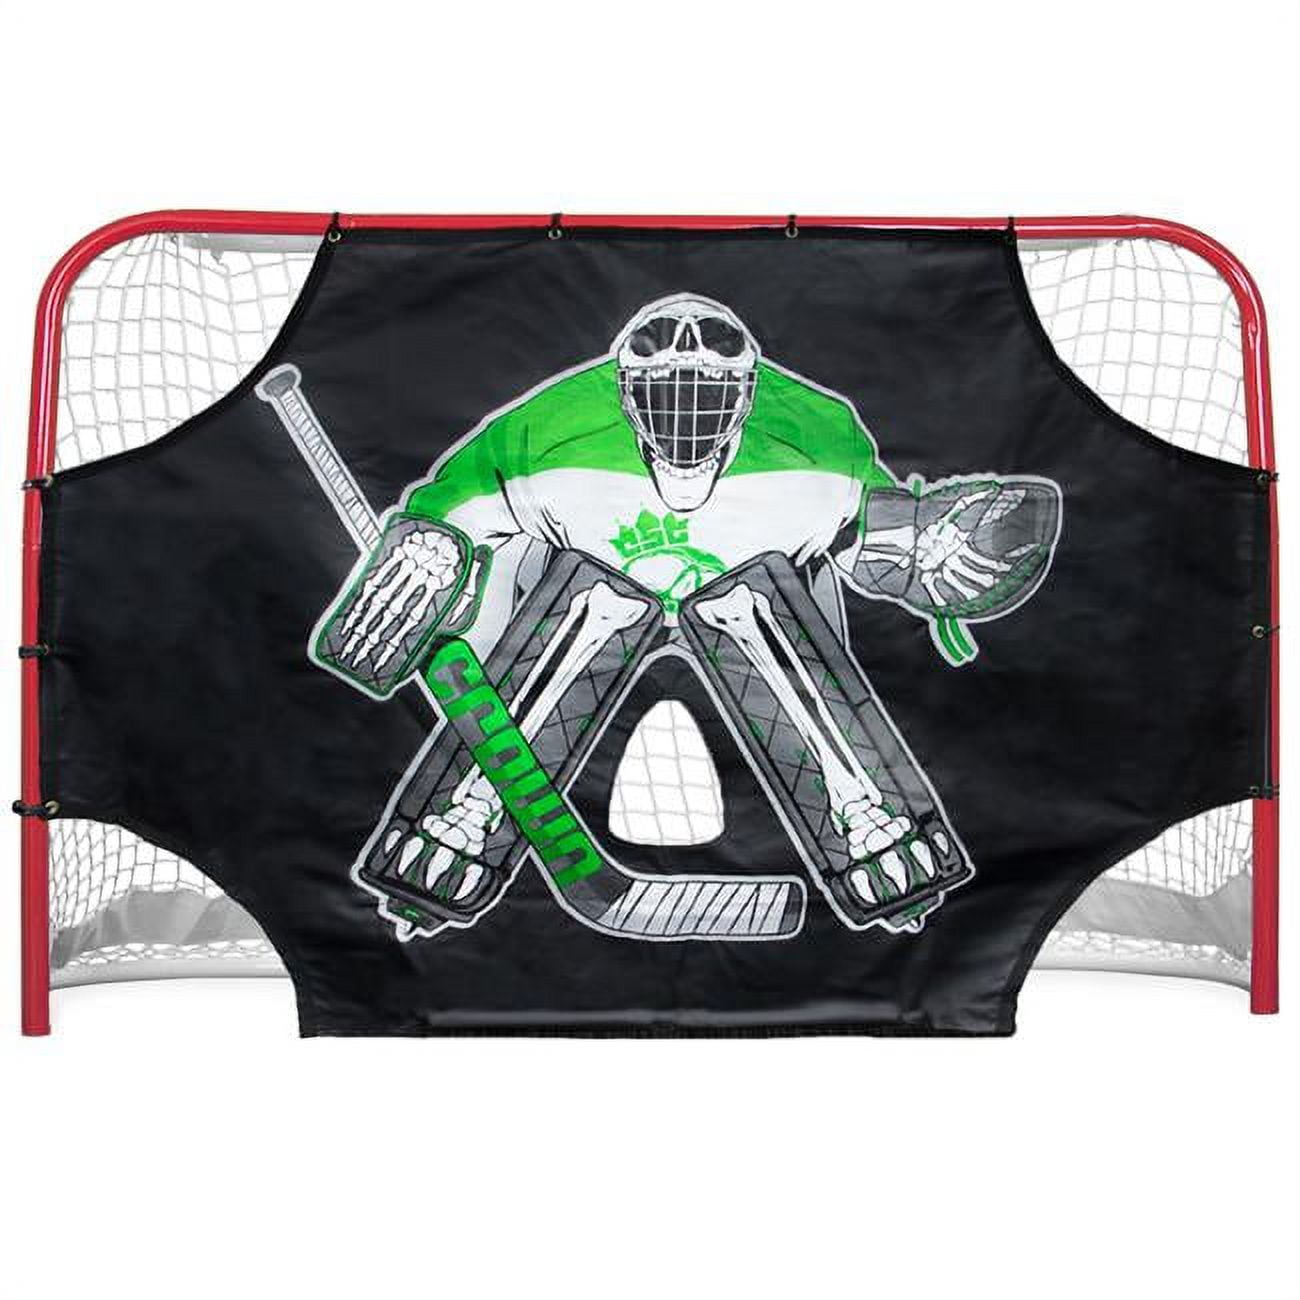 Picture of Brybelly SHOK-201 72 x 48 in. Green Skull Sniper Street Hockey Shooting Target